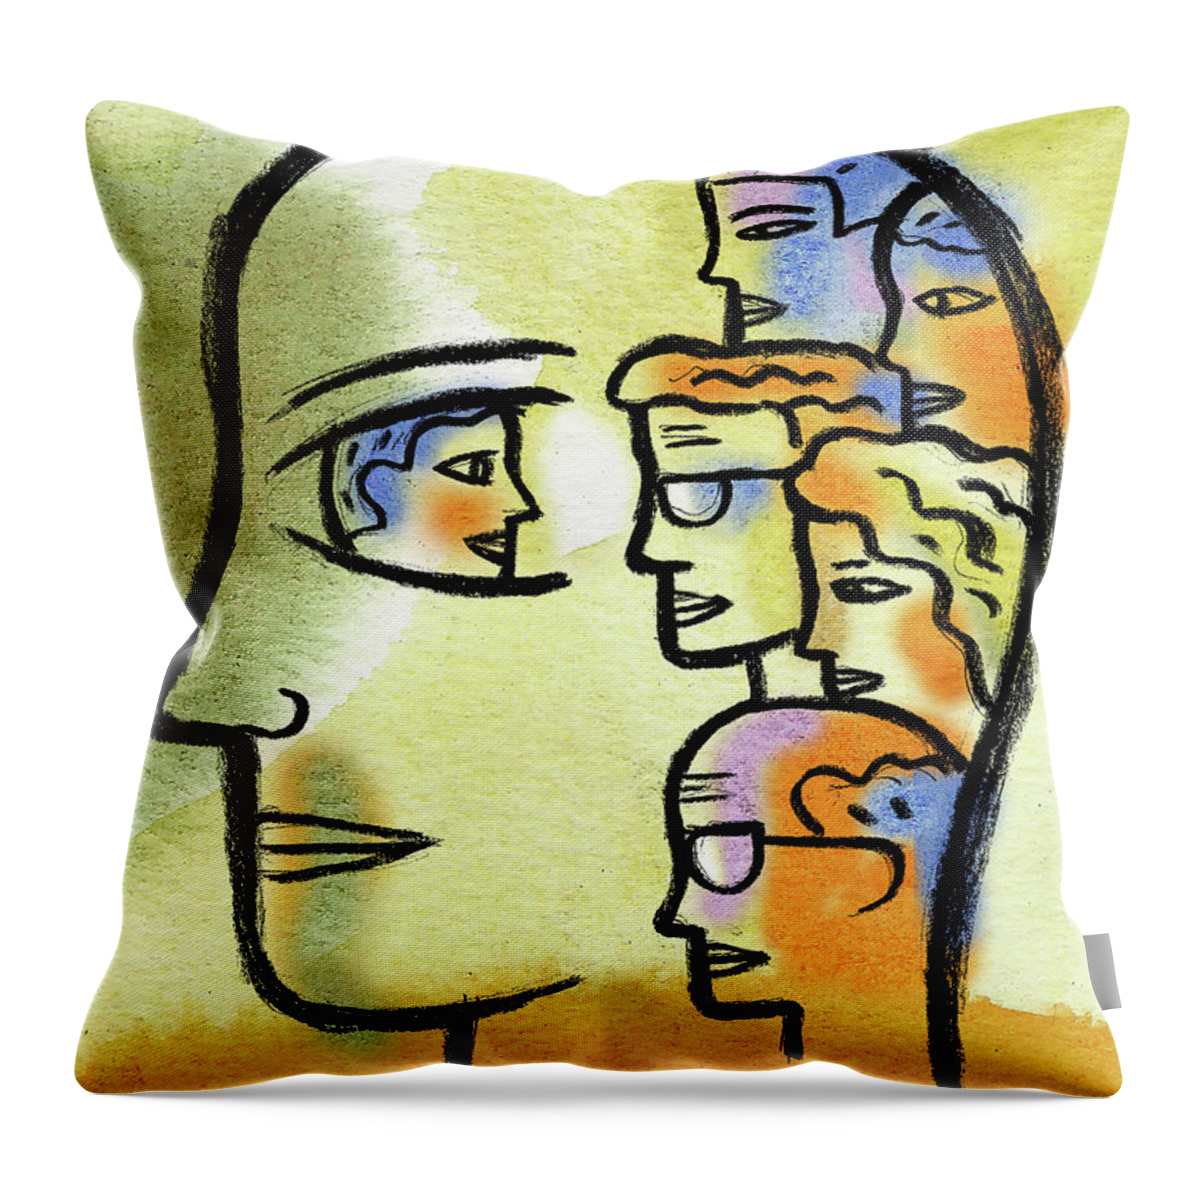  Inside Head People Inside Head Psychotherapy Therapist Therapy Bipolar Analyze Examine Look Mania Mental Disorder Schizophrenia Brain Disorder Mind Hallucinations Hallucinate Voices Profiles Eye Medical Personalities Split Split Personalities Psychotherapy Psychology Medical Colorful Throw Pillow featuring the painting WHAT do you think about your freands by Leon Zernitsky